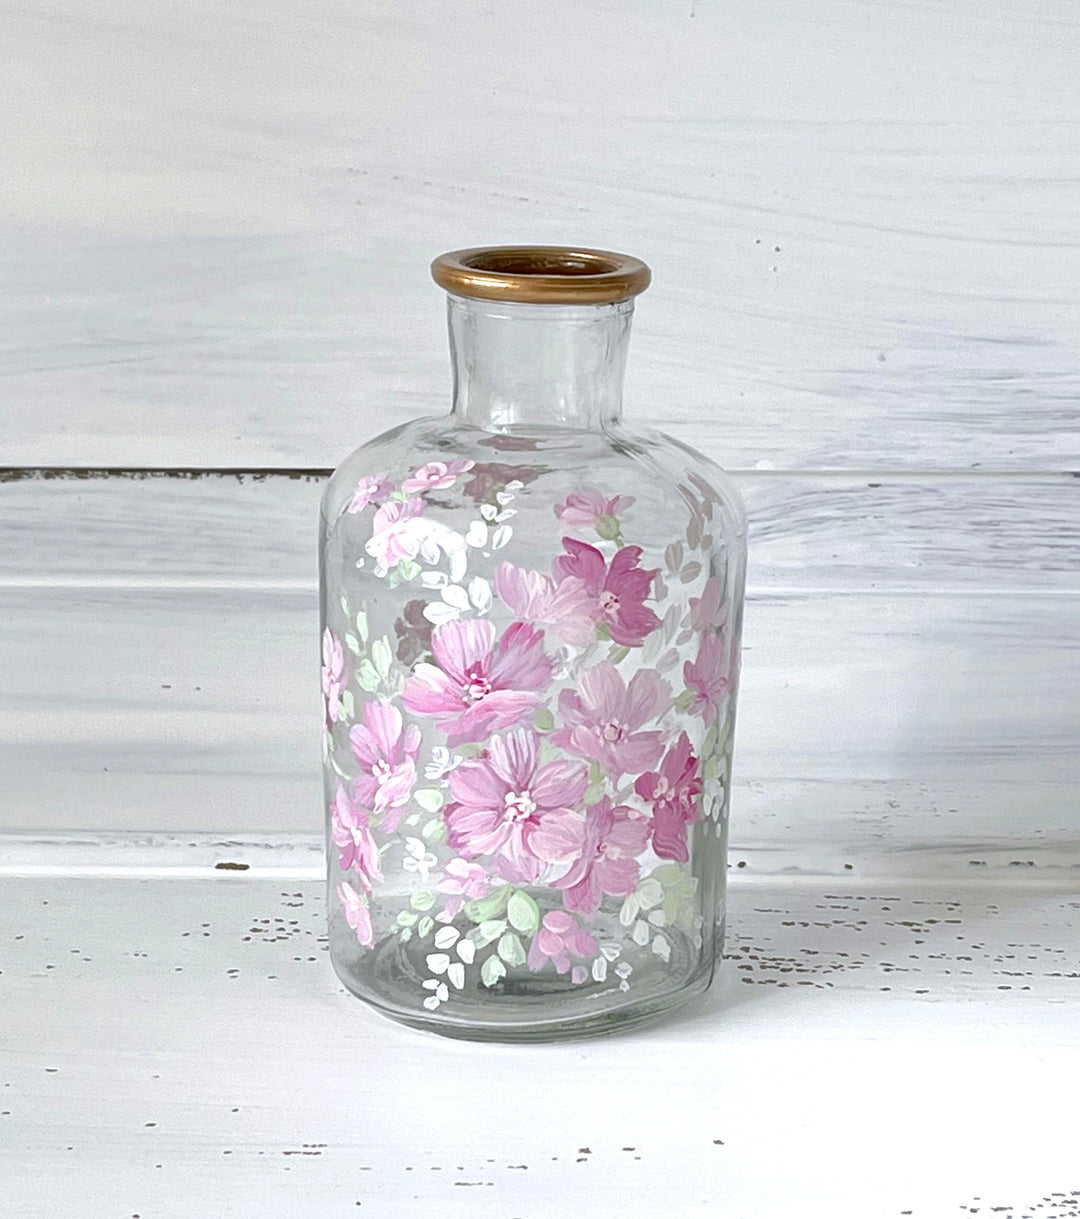 Shabby Chic Vintage Bottle Budvase Pink Wildflowers Original by Debi Coules